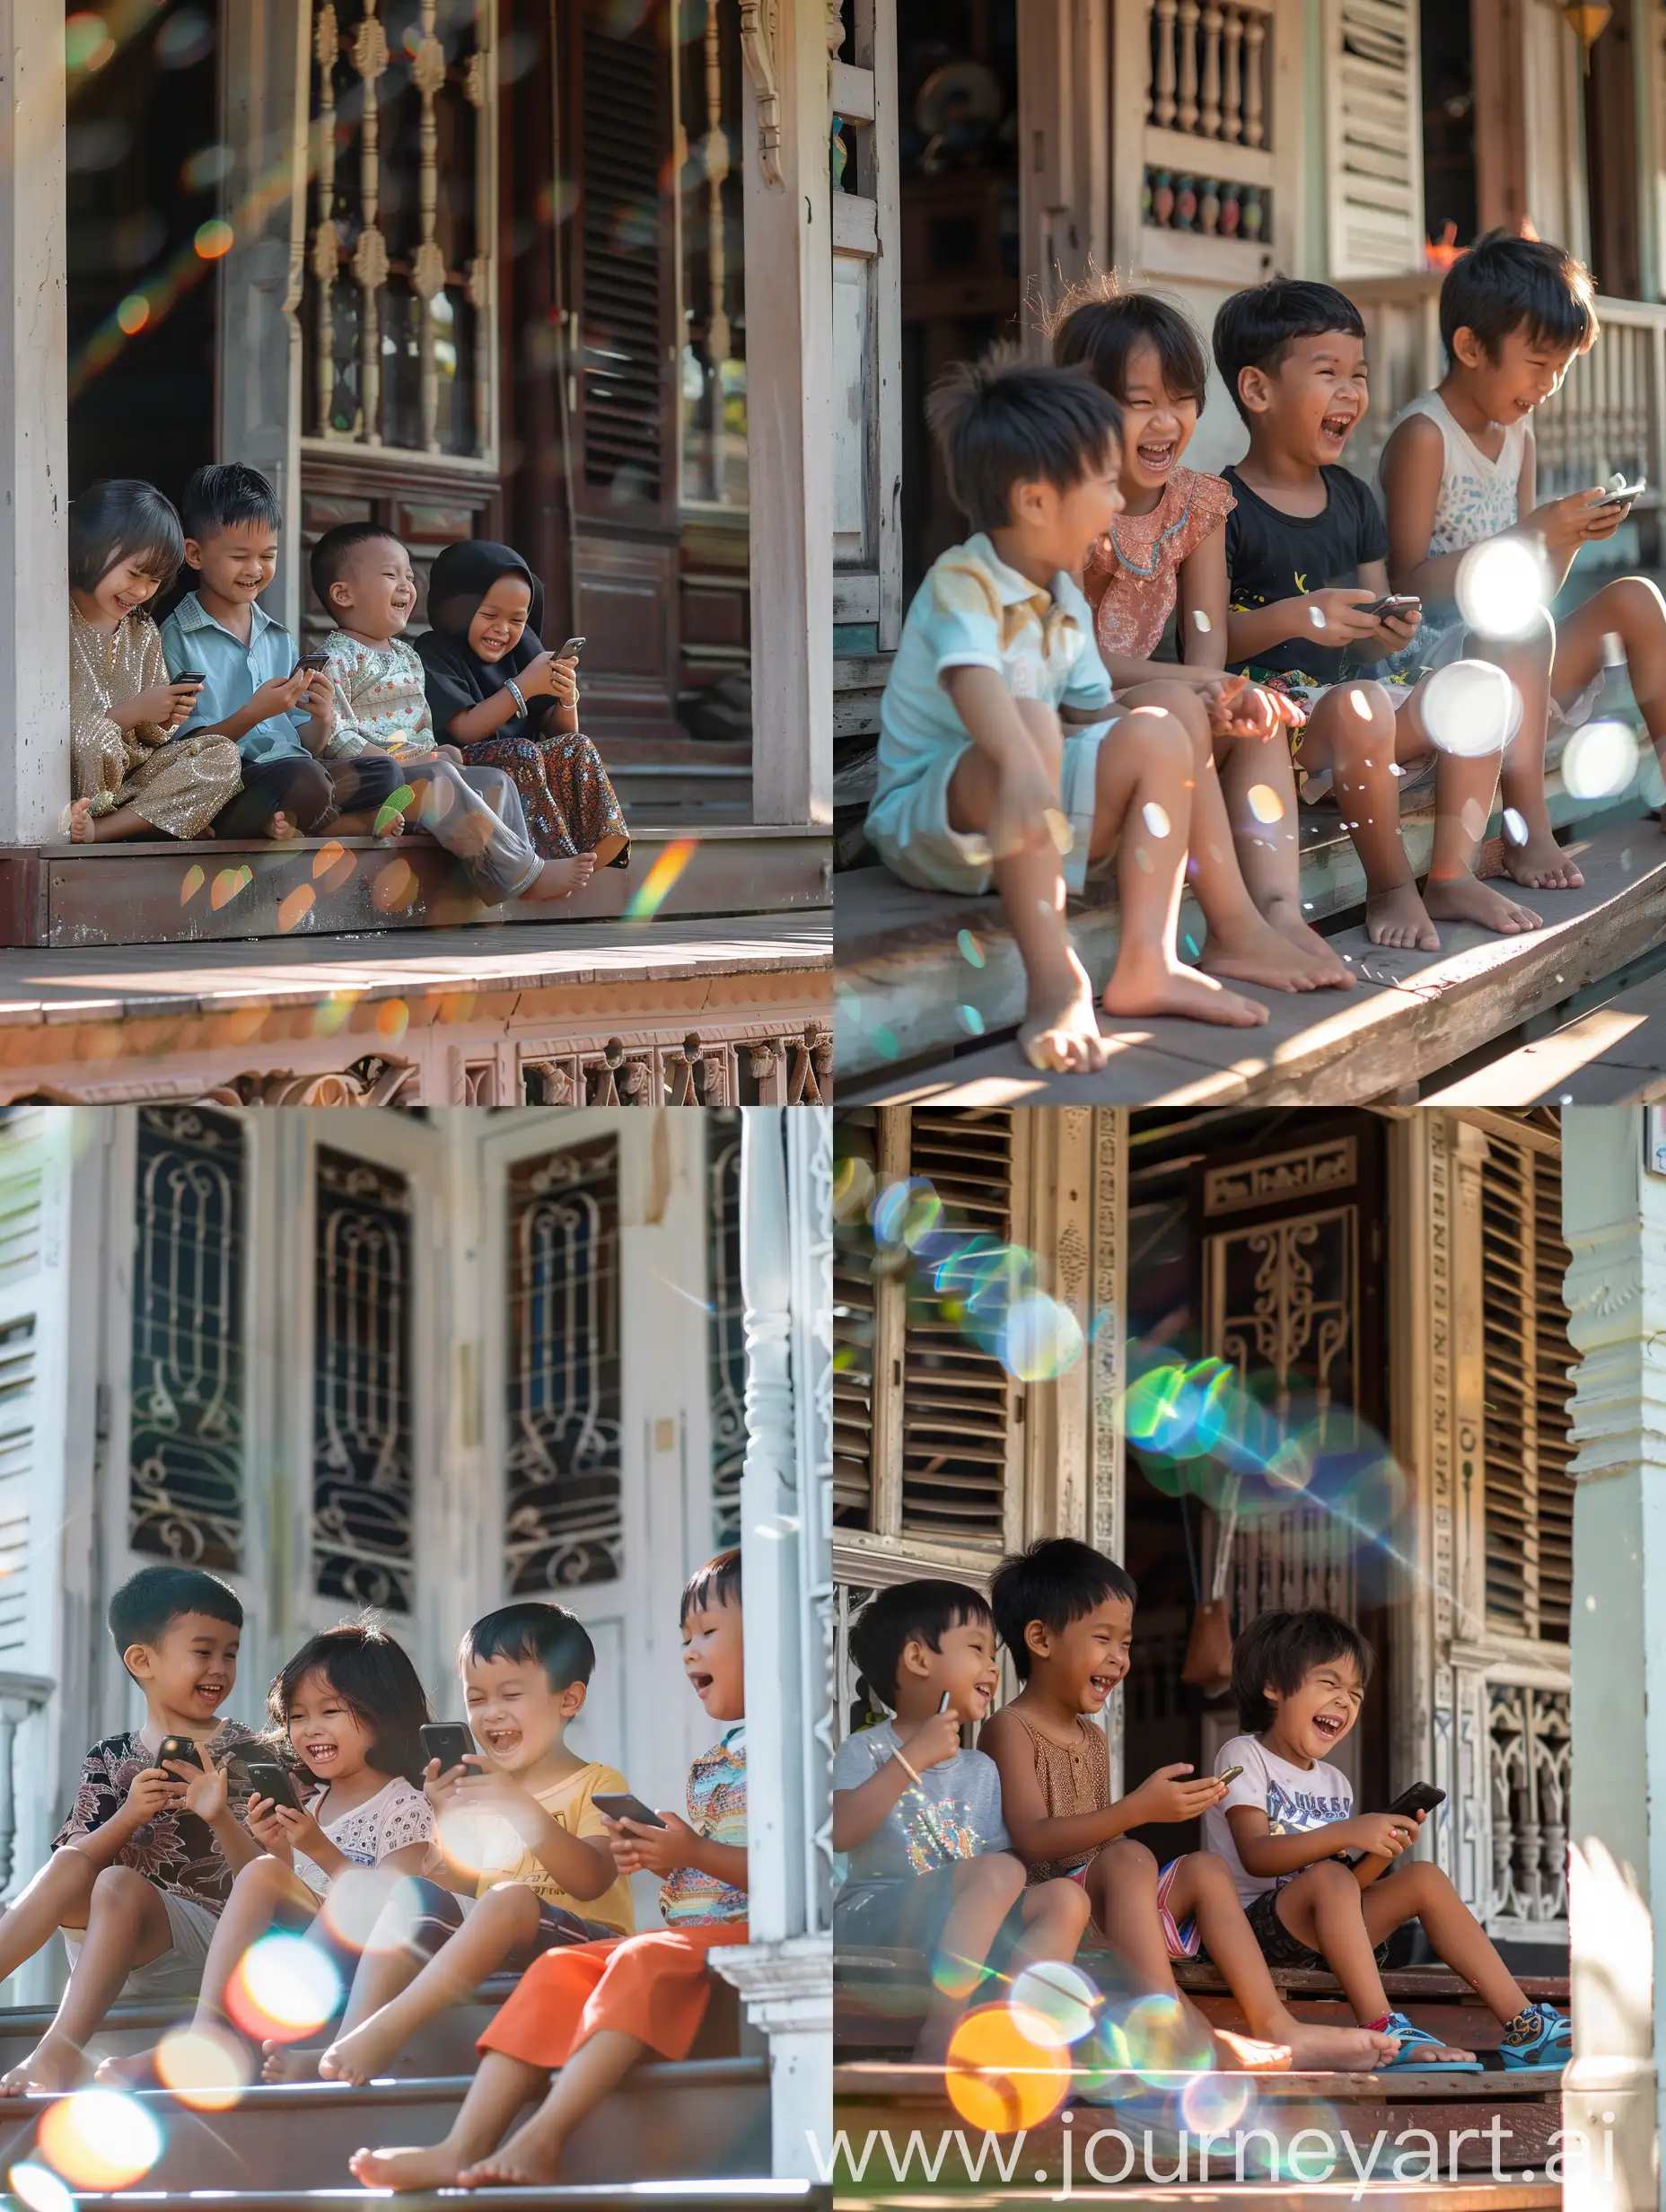 Malay-Children-Sharing-Laughter-and-Phones-on-Porch-Steps-under-Sunlight-Refraction